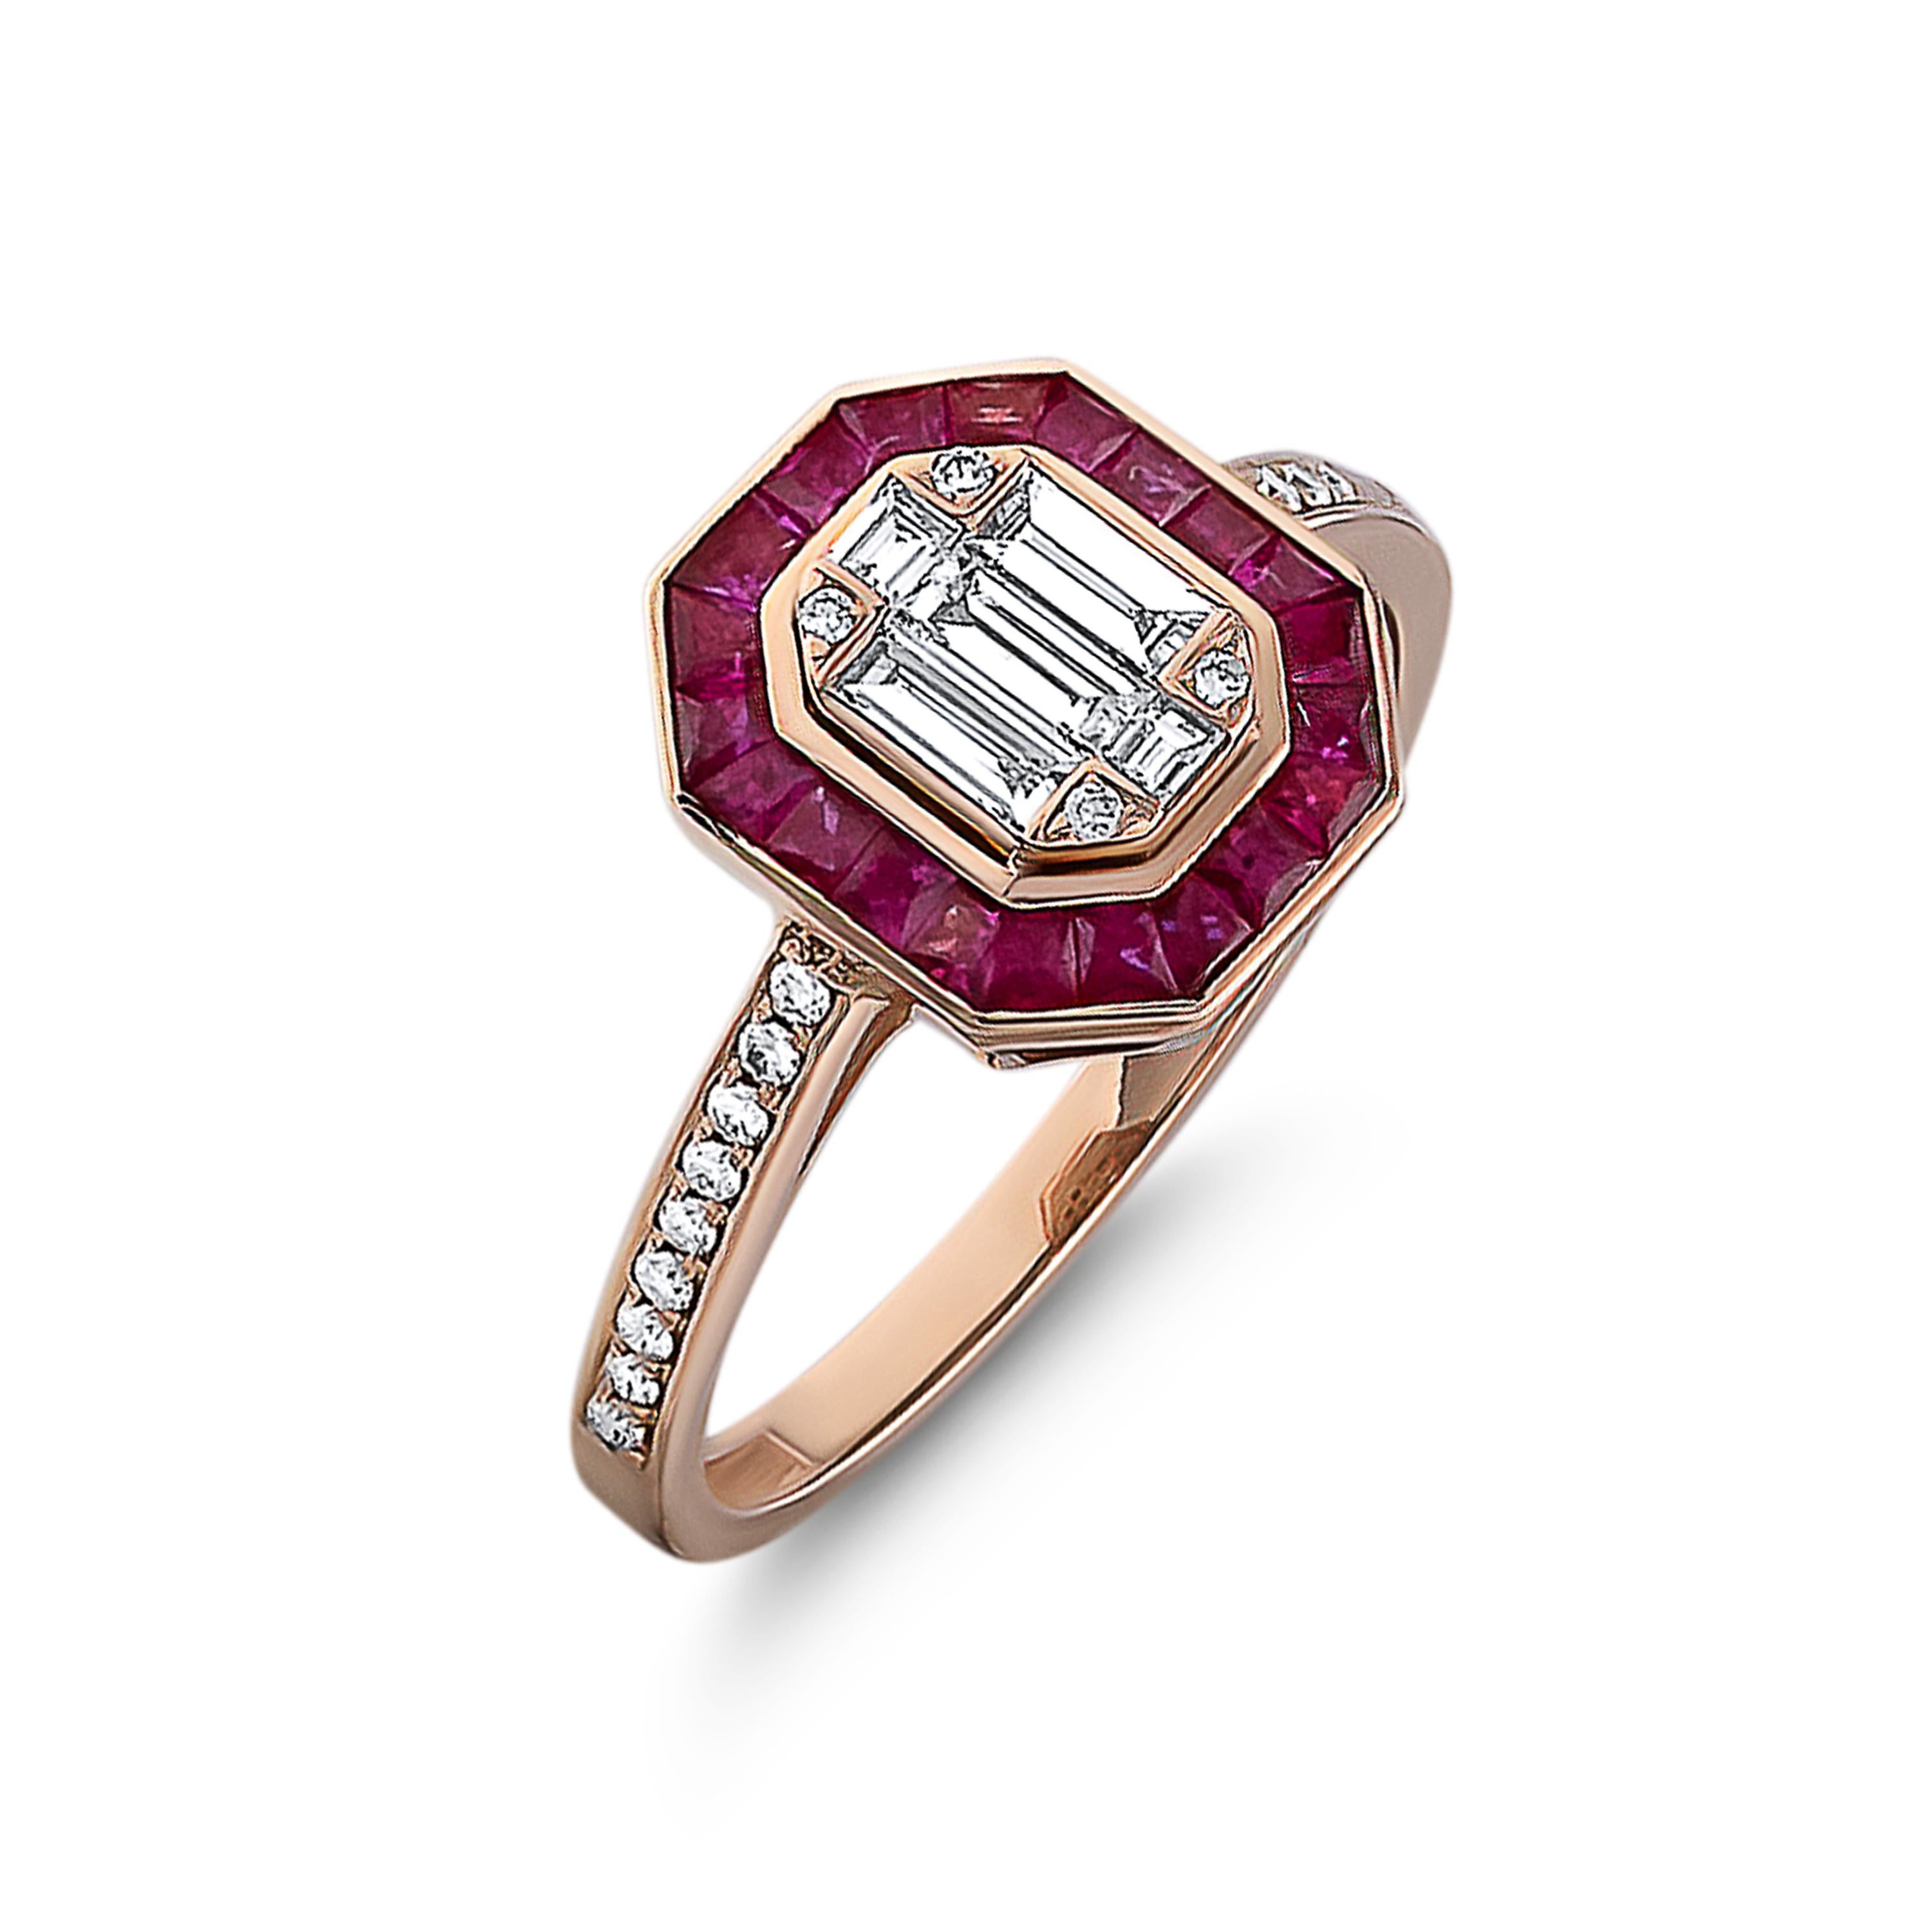 An amazing yellow gold ring set with Rubies, Baguette diamonds, and round diamonds.
The ring is set with 0.14 Carats of round diamonds, 0.26 Carats of Baguette diamonds, and a halo of Rubies weighing 1.37 Carats.
Totally the ring is set with 0.40